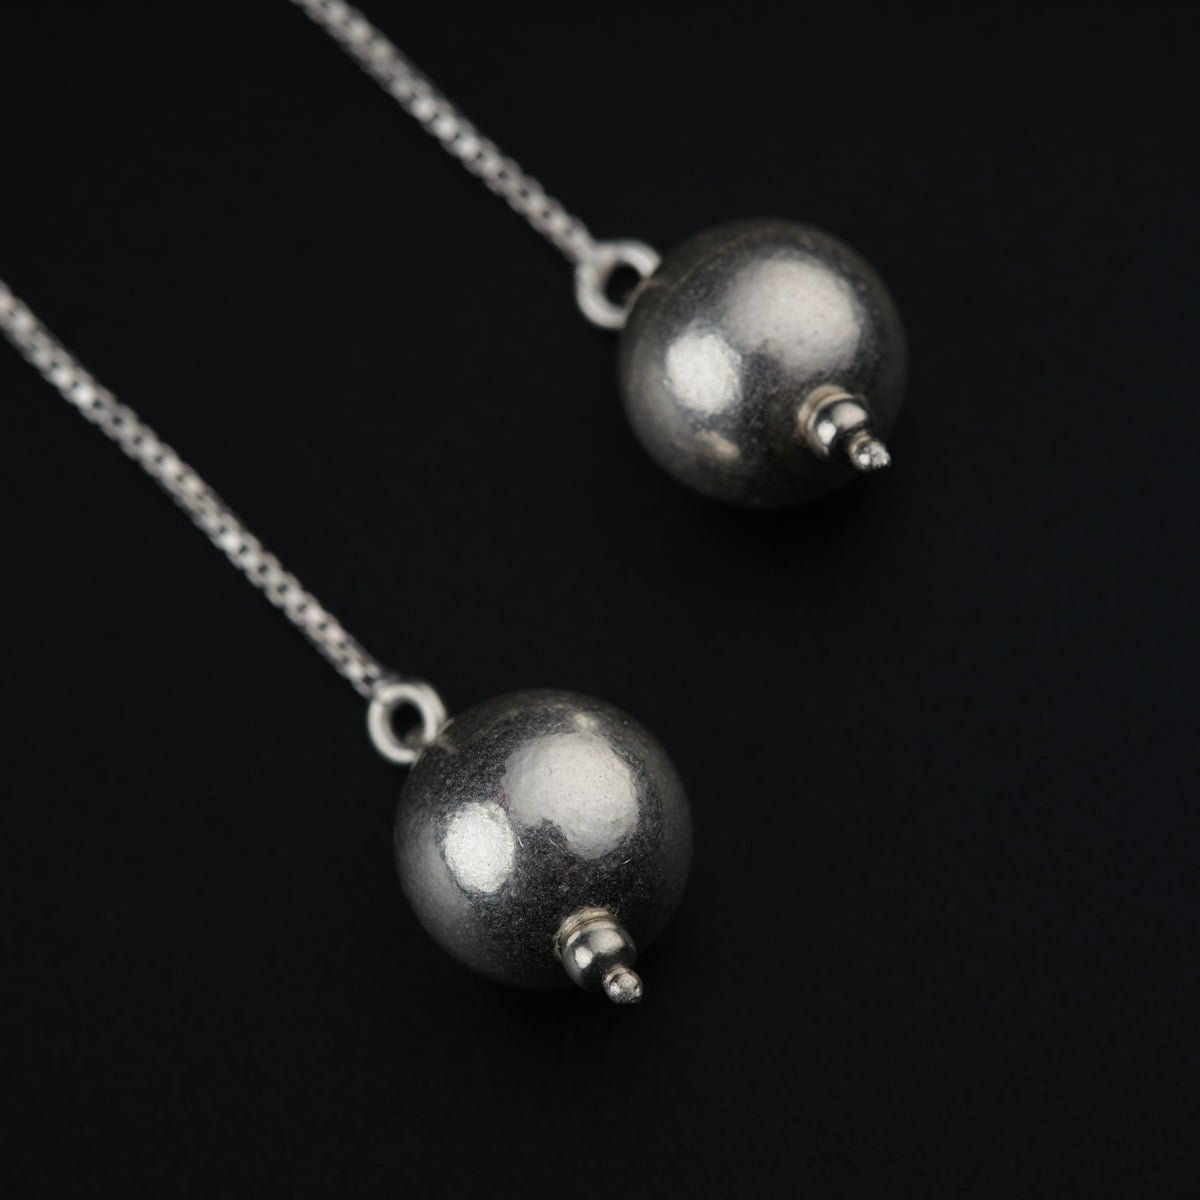 a pair of silver balls on a chain